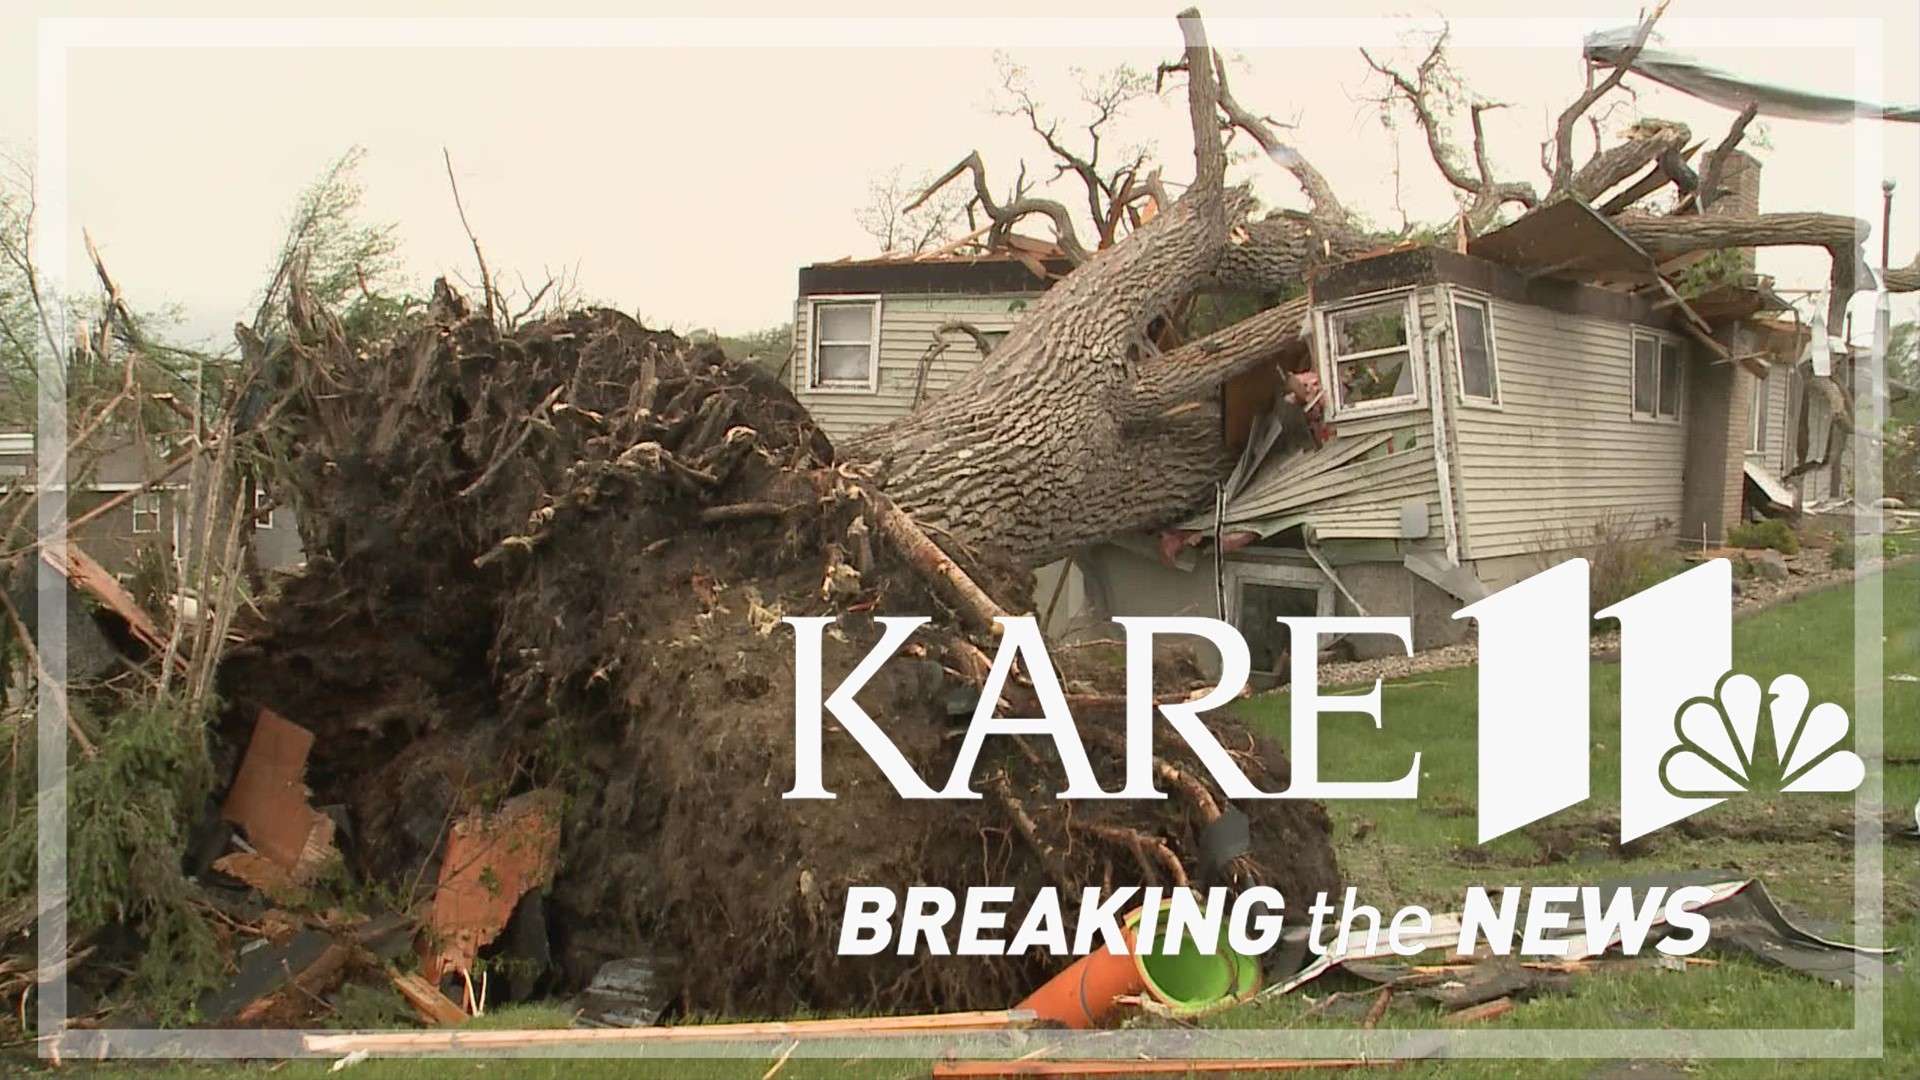 KARE 11's Kent Erdahl investigates how Minnesota's severe weather outcomes influence the high cost of homeowner's insurance.